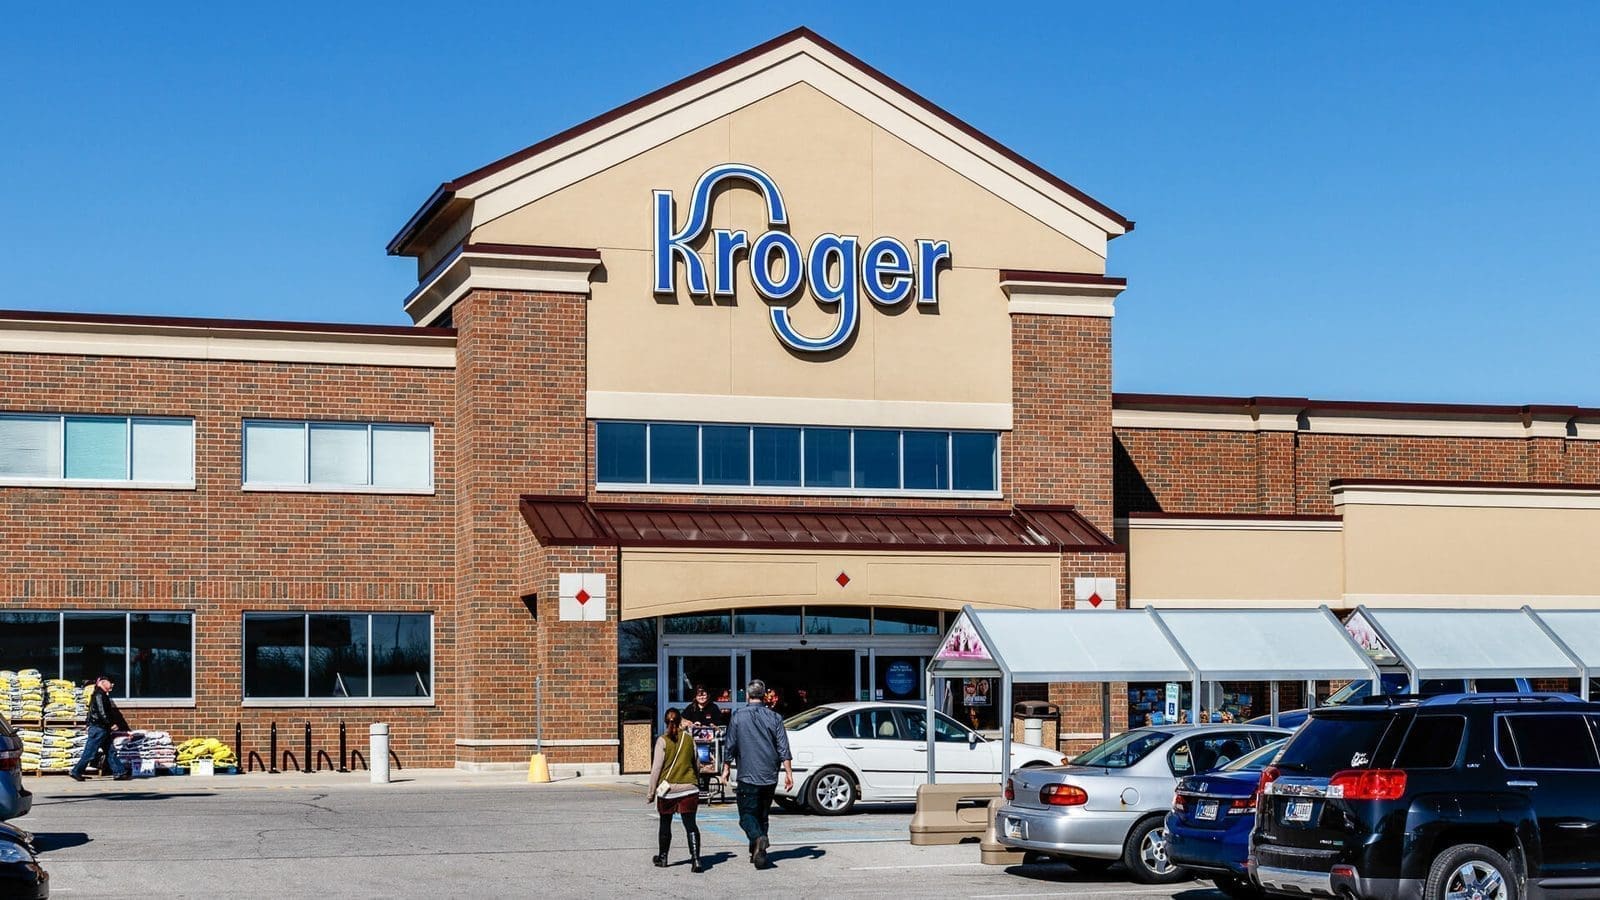 Kroger dedicates US$24.6bn to acquire Albertsons to form second largest supermarket chain